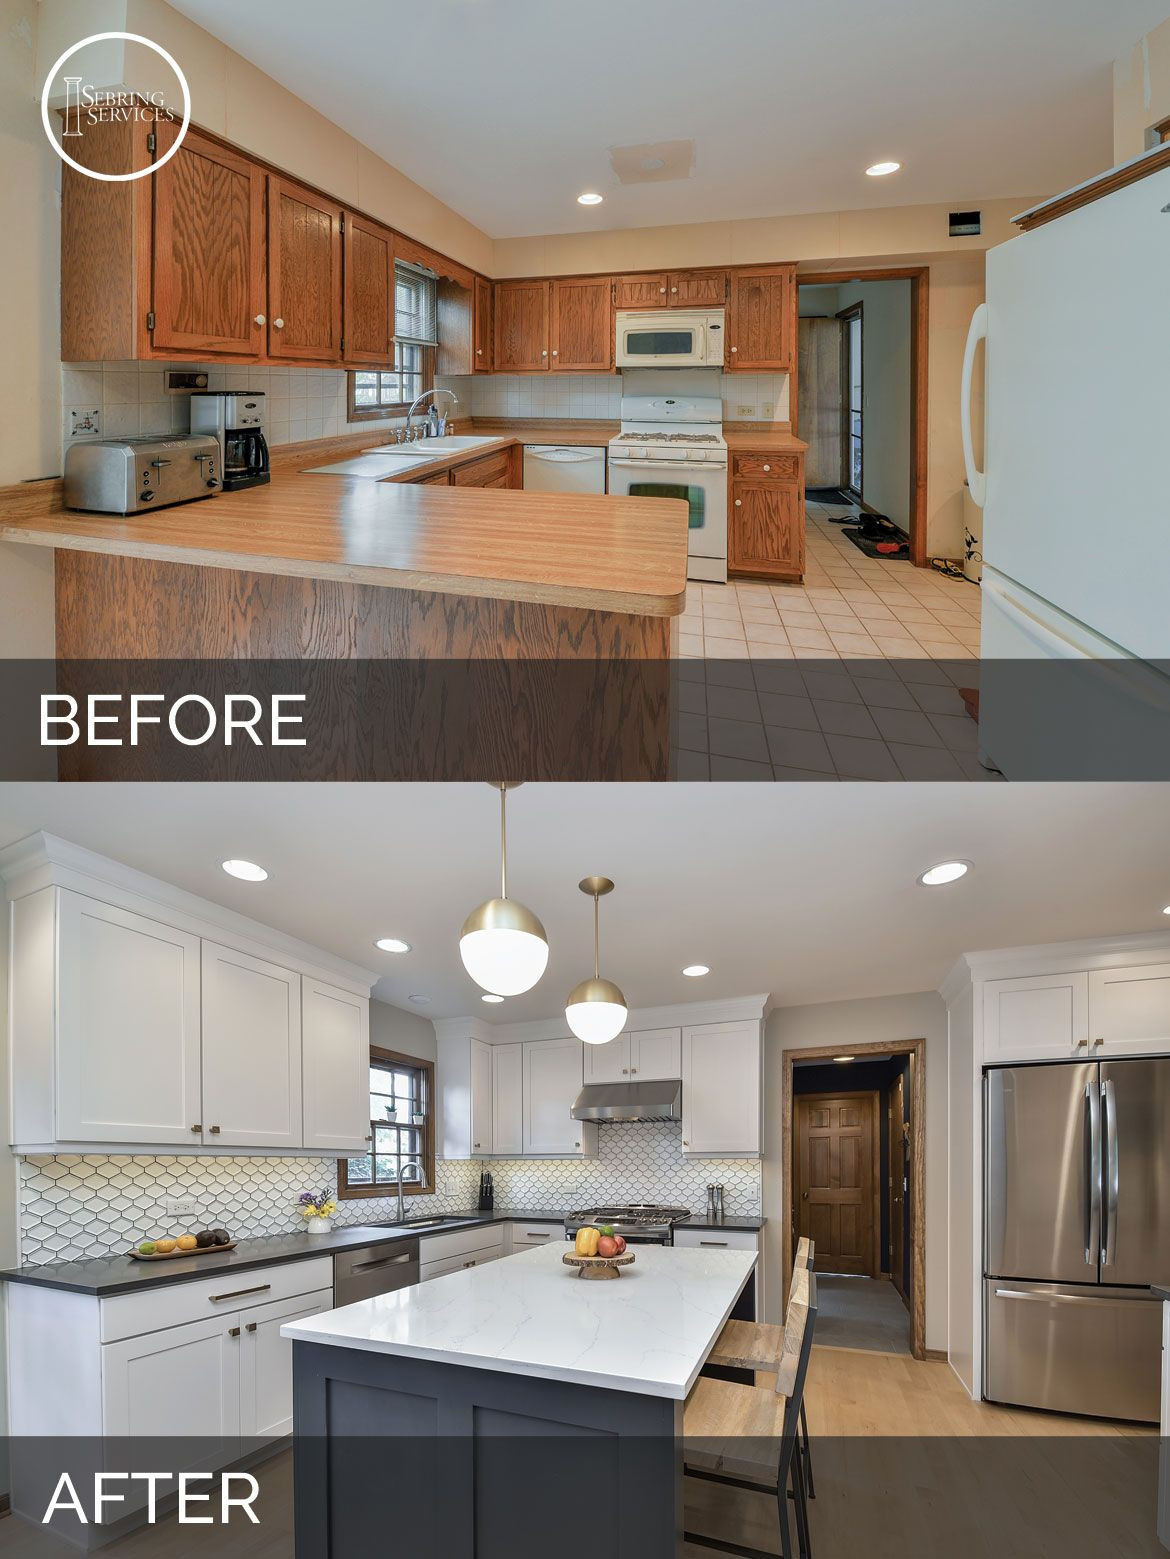 Kitchen Remodel Ideas Before And After
 Justin & Carina’s Kitchen Before & After